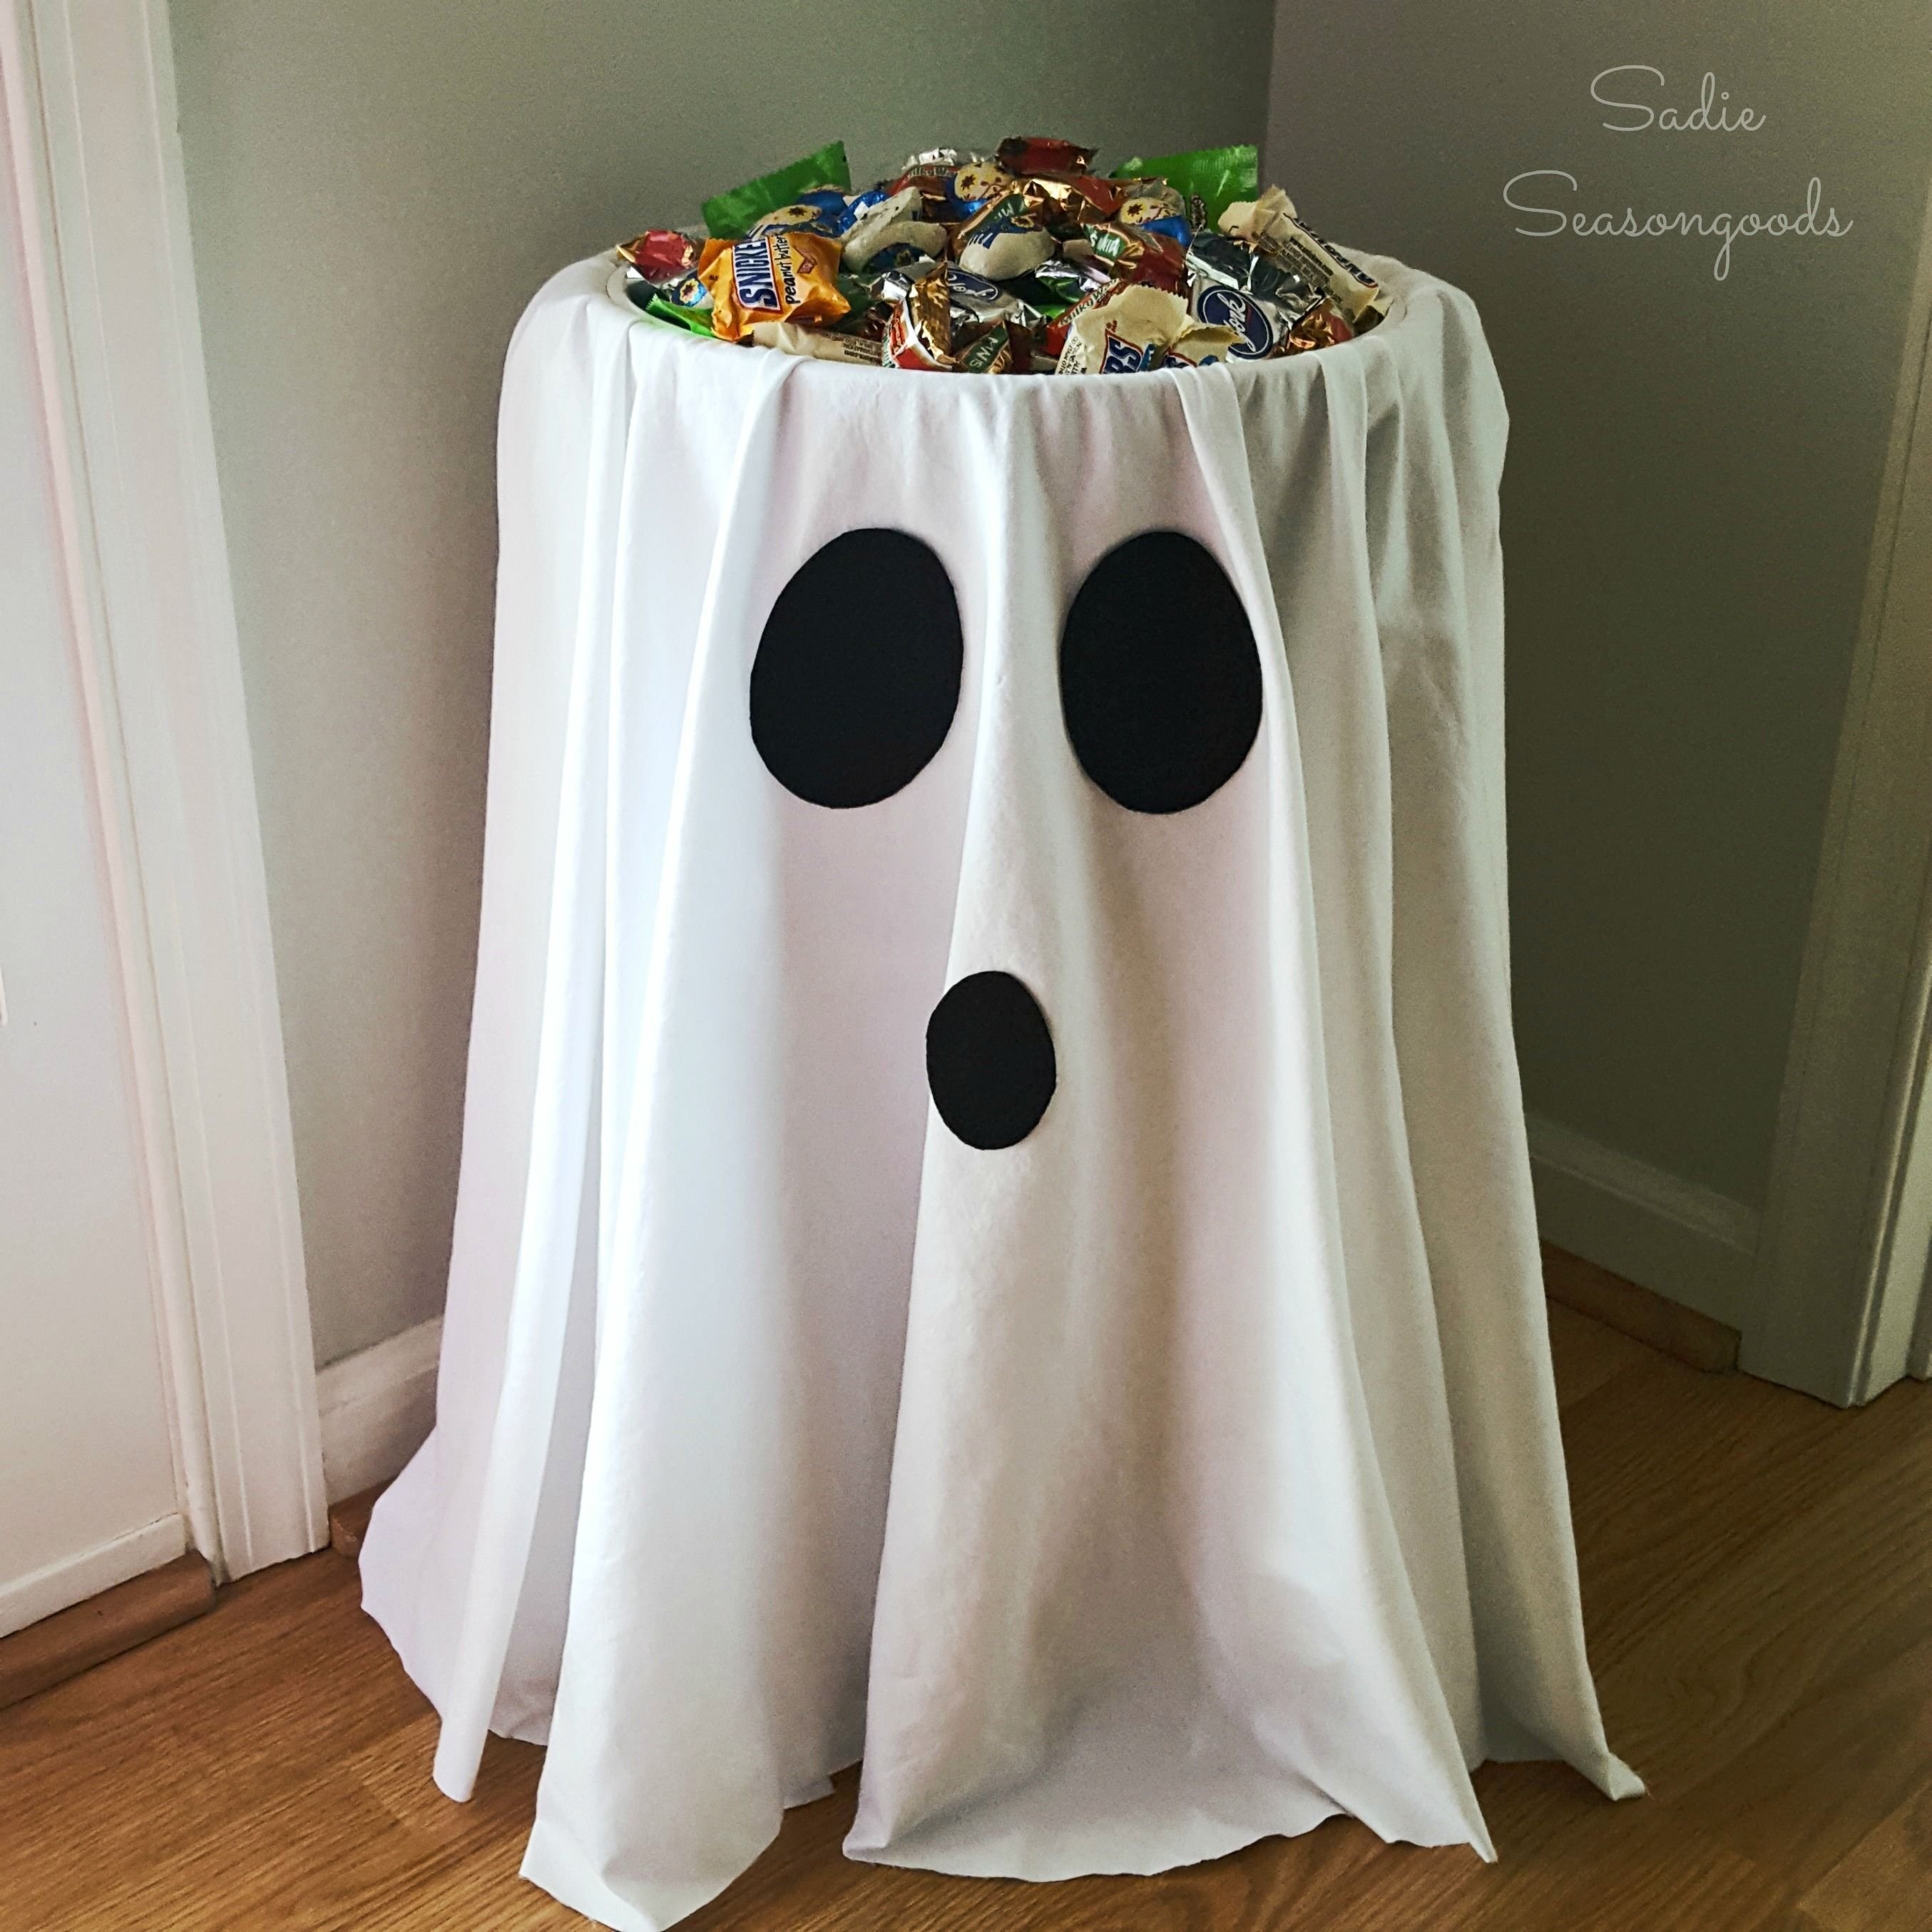 10 Elegant Ideas For What To Be For Halloween diy halloween ideas ensures a devilish air diy halloween 2022